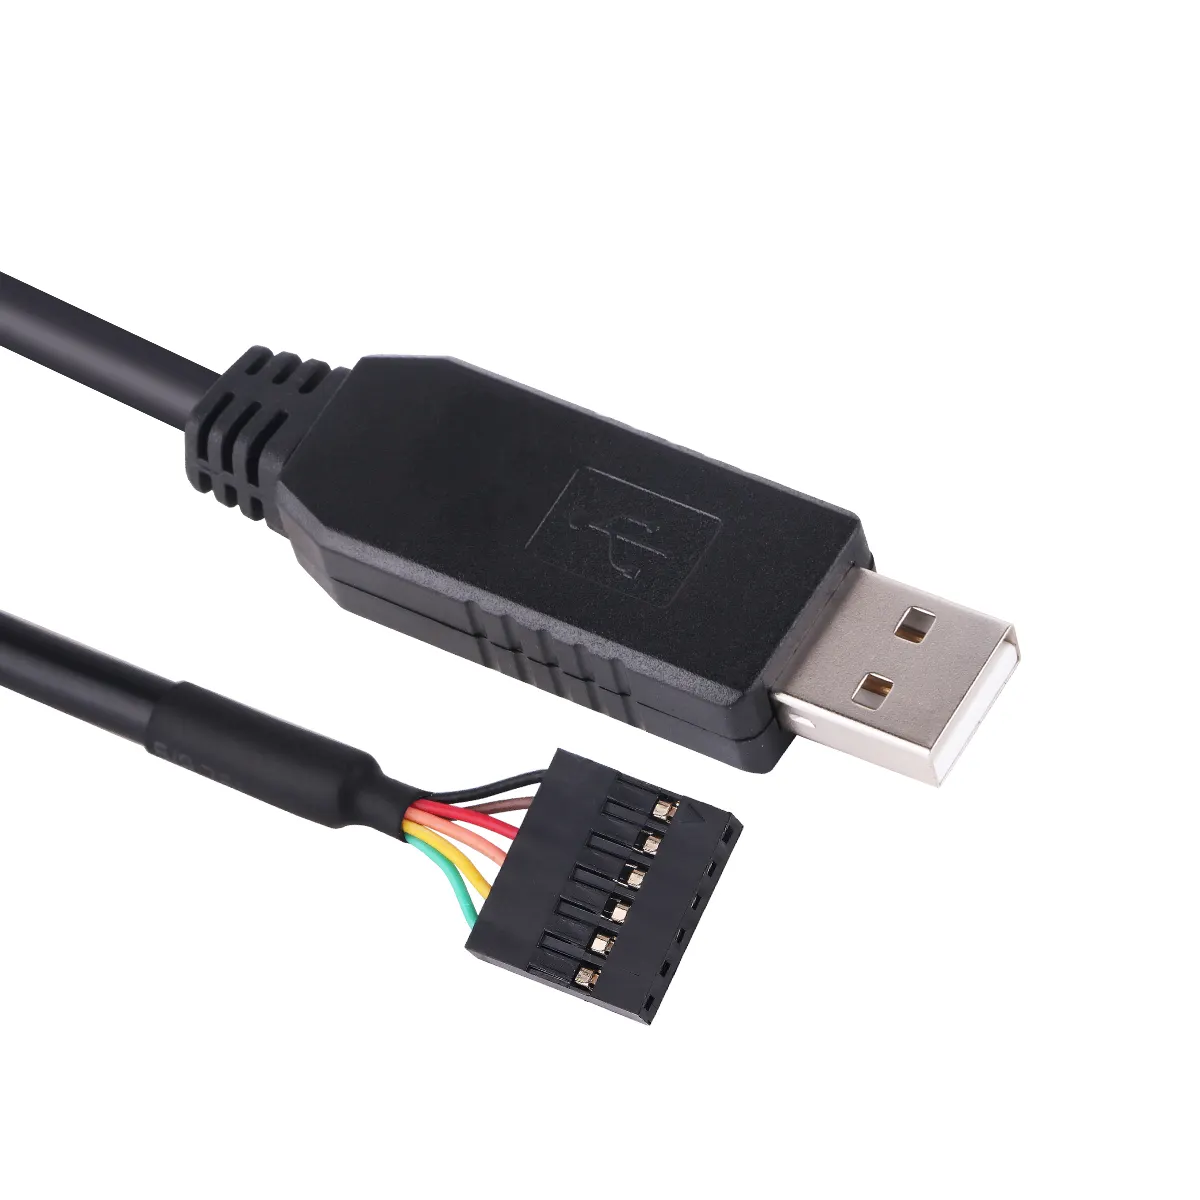 UBS to TTL 3v3 6 Pin Dupont Header Serial Cable,FTDI Chip Indsid ,Compatible with Windows ,Linux Mac OS